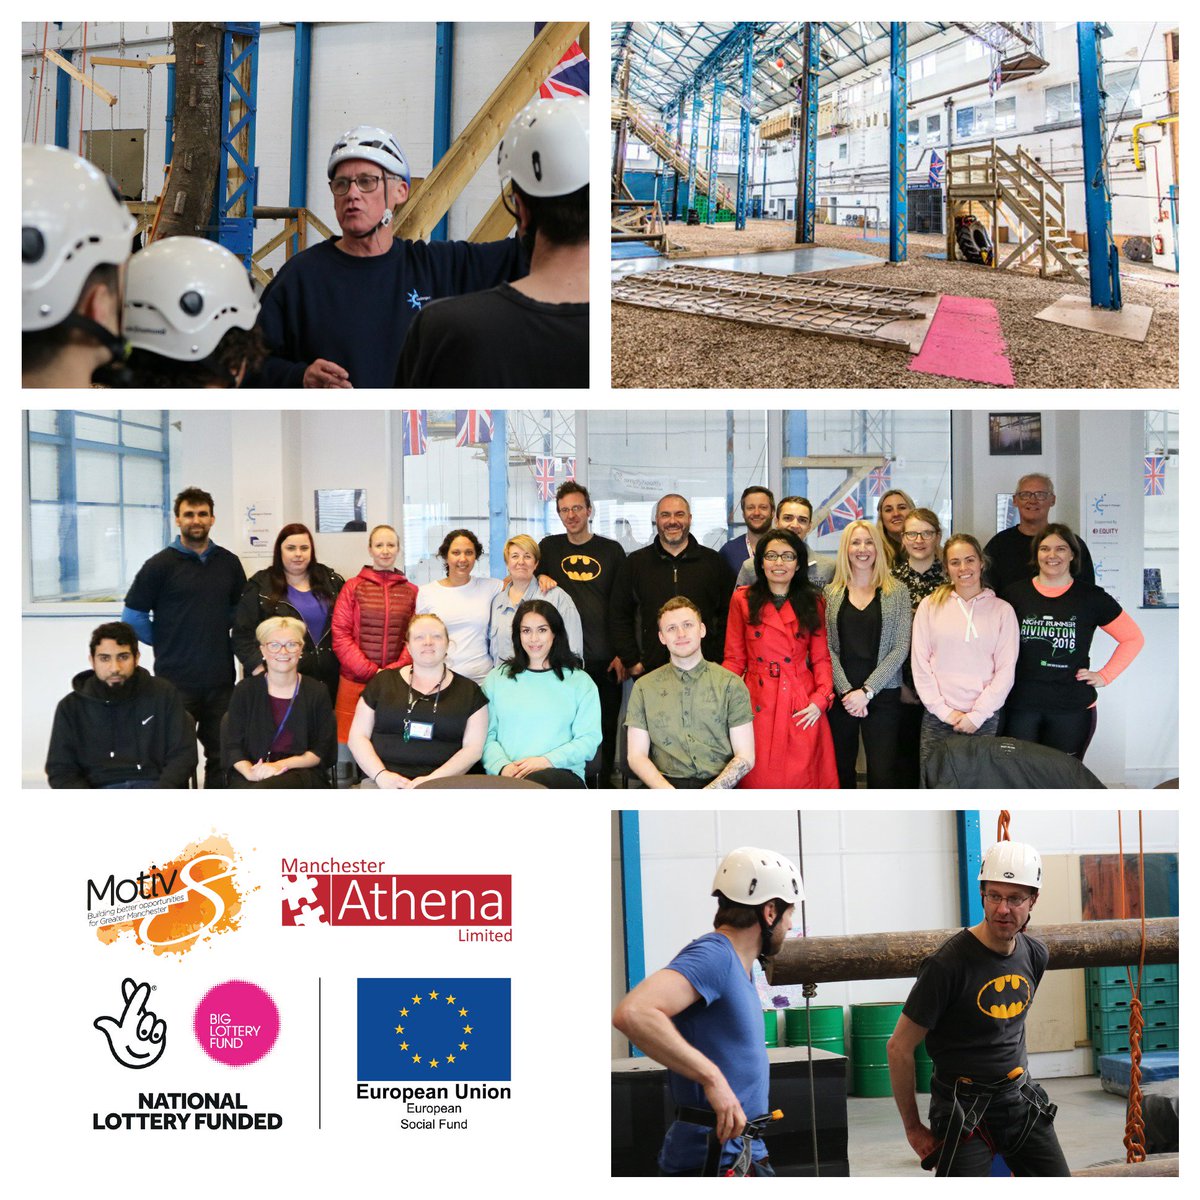 Fantastic Team Building day for our #Motiv8 #Biglotteryesf teams earlier this week with our specialist partner @C4CTeambuilding #Challenge4Change  #Teamwork